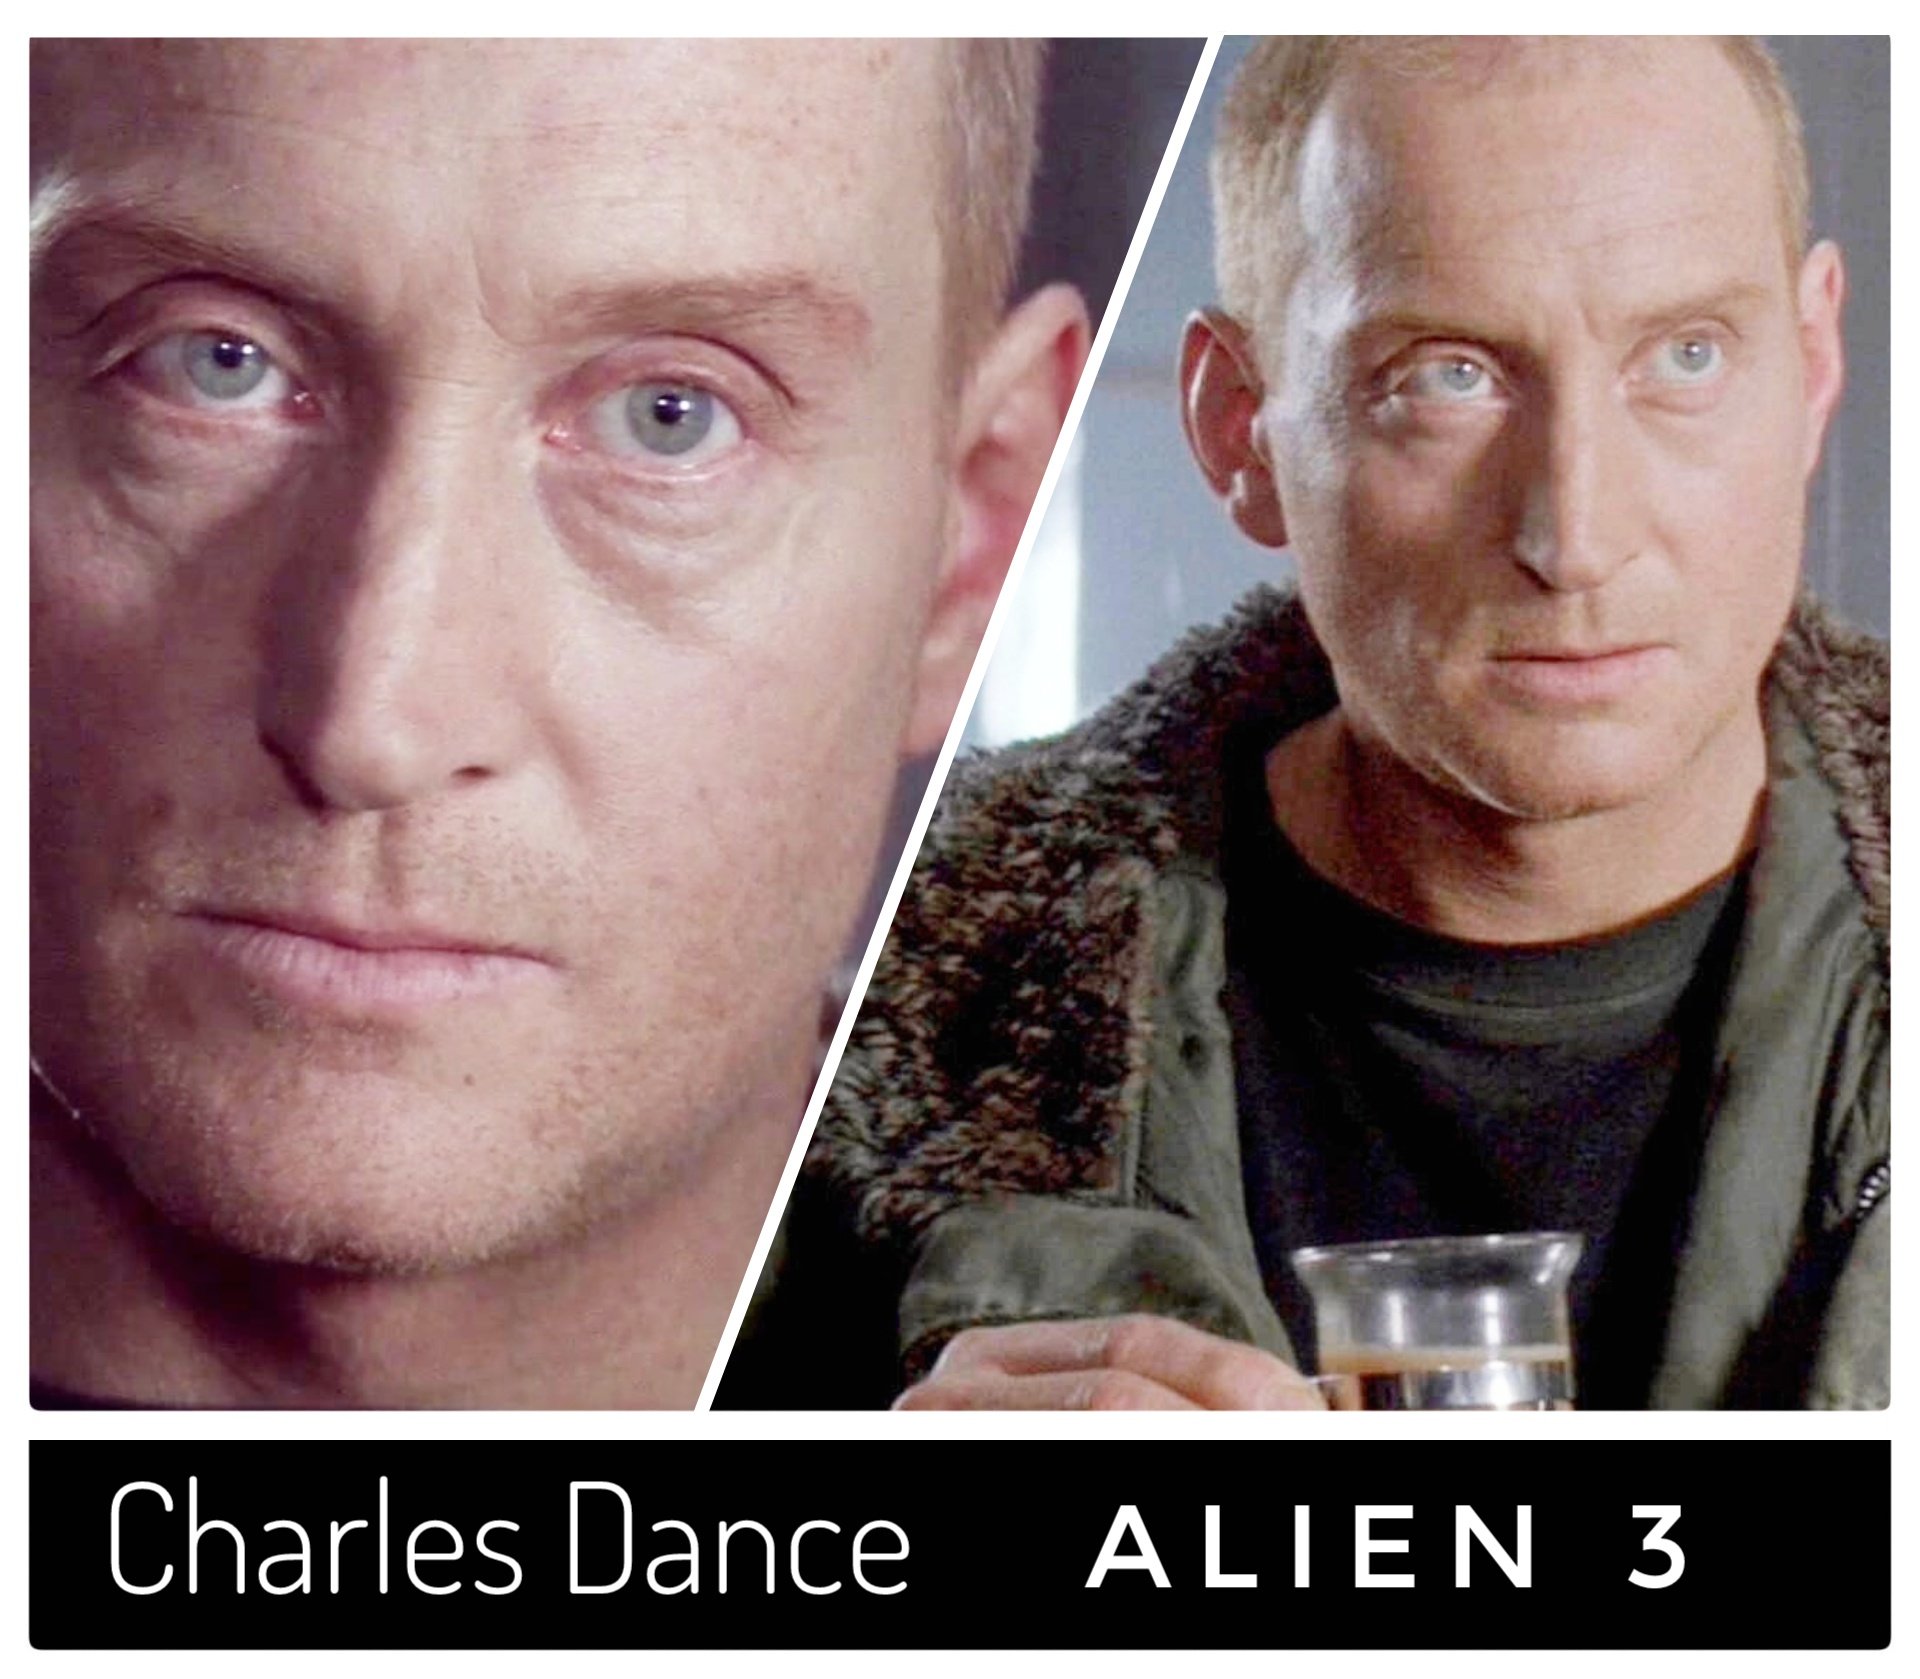 The legendary Charles Dance was born on this day, happy birthday 